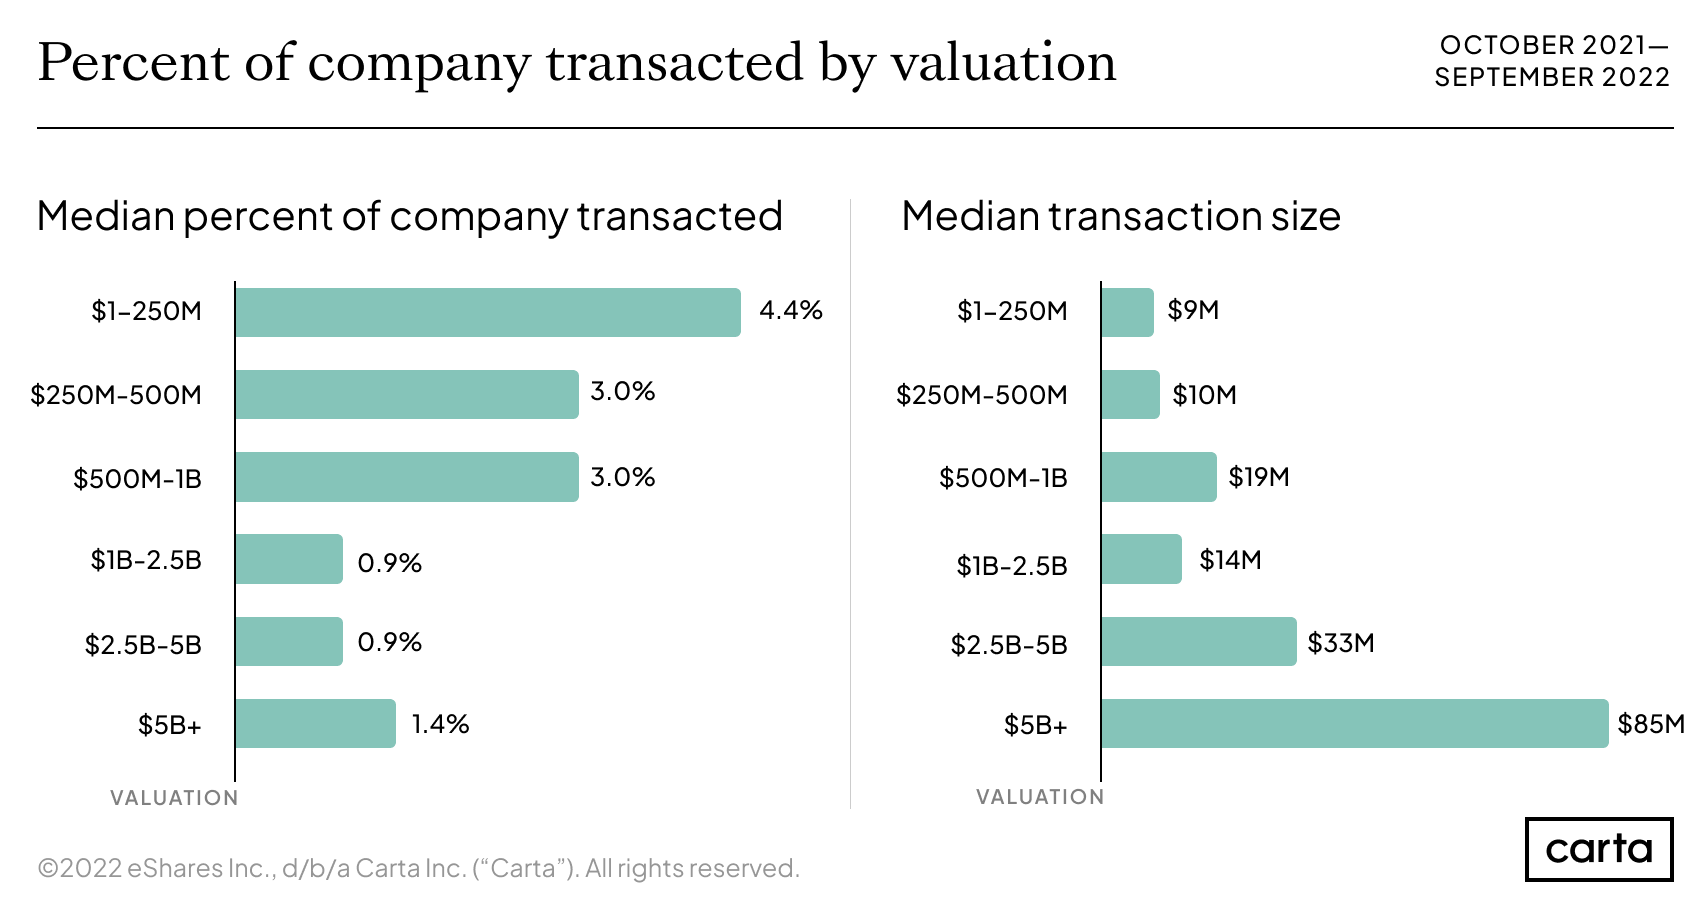 Median percentage of company transacted and median transaction size for companies conducting secondary transactions on Carta from October 2021 to September 2022